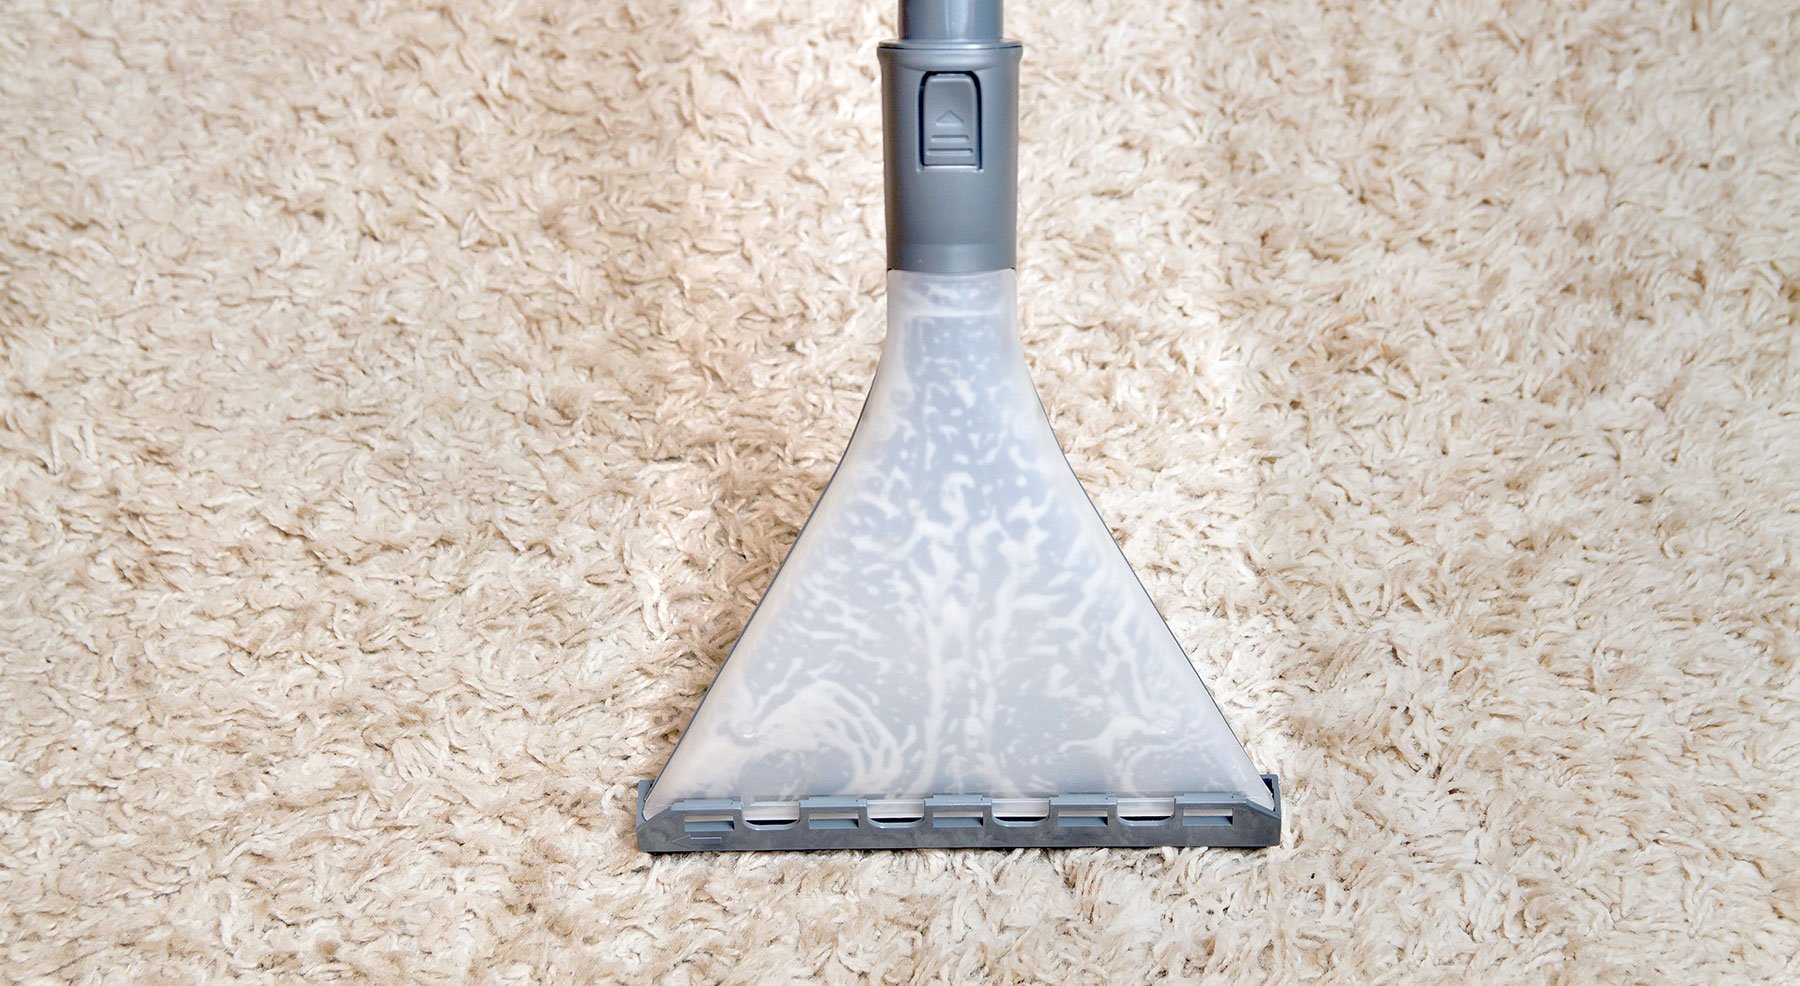 Carpet cleaning using a steam cleaner nozzle in San Mateo County.